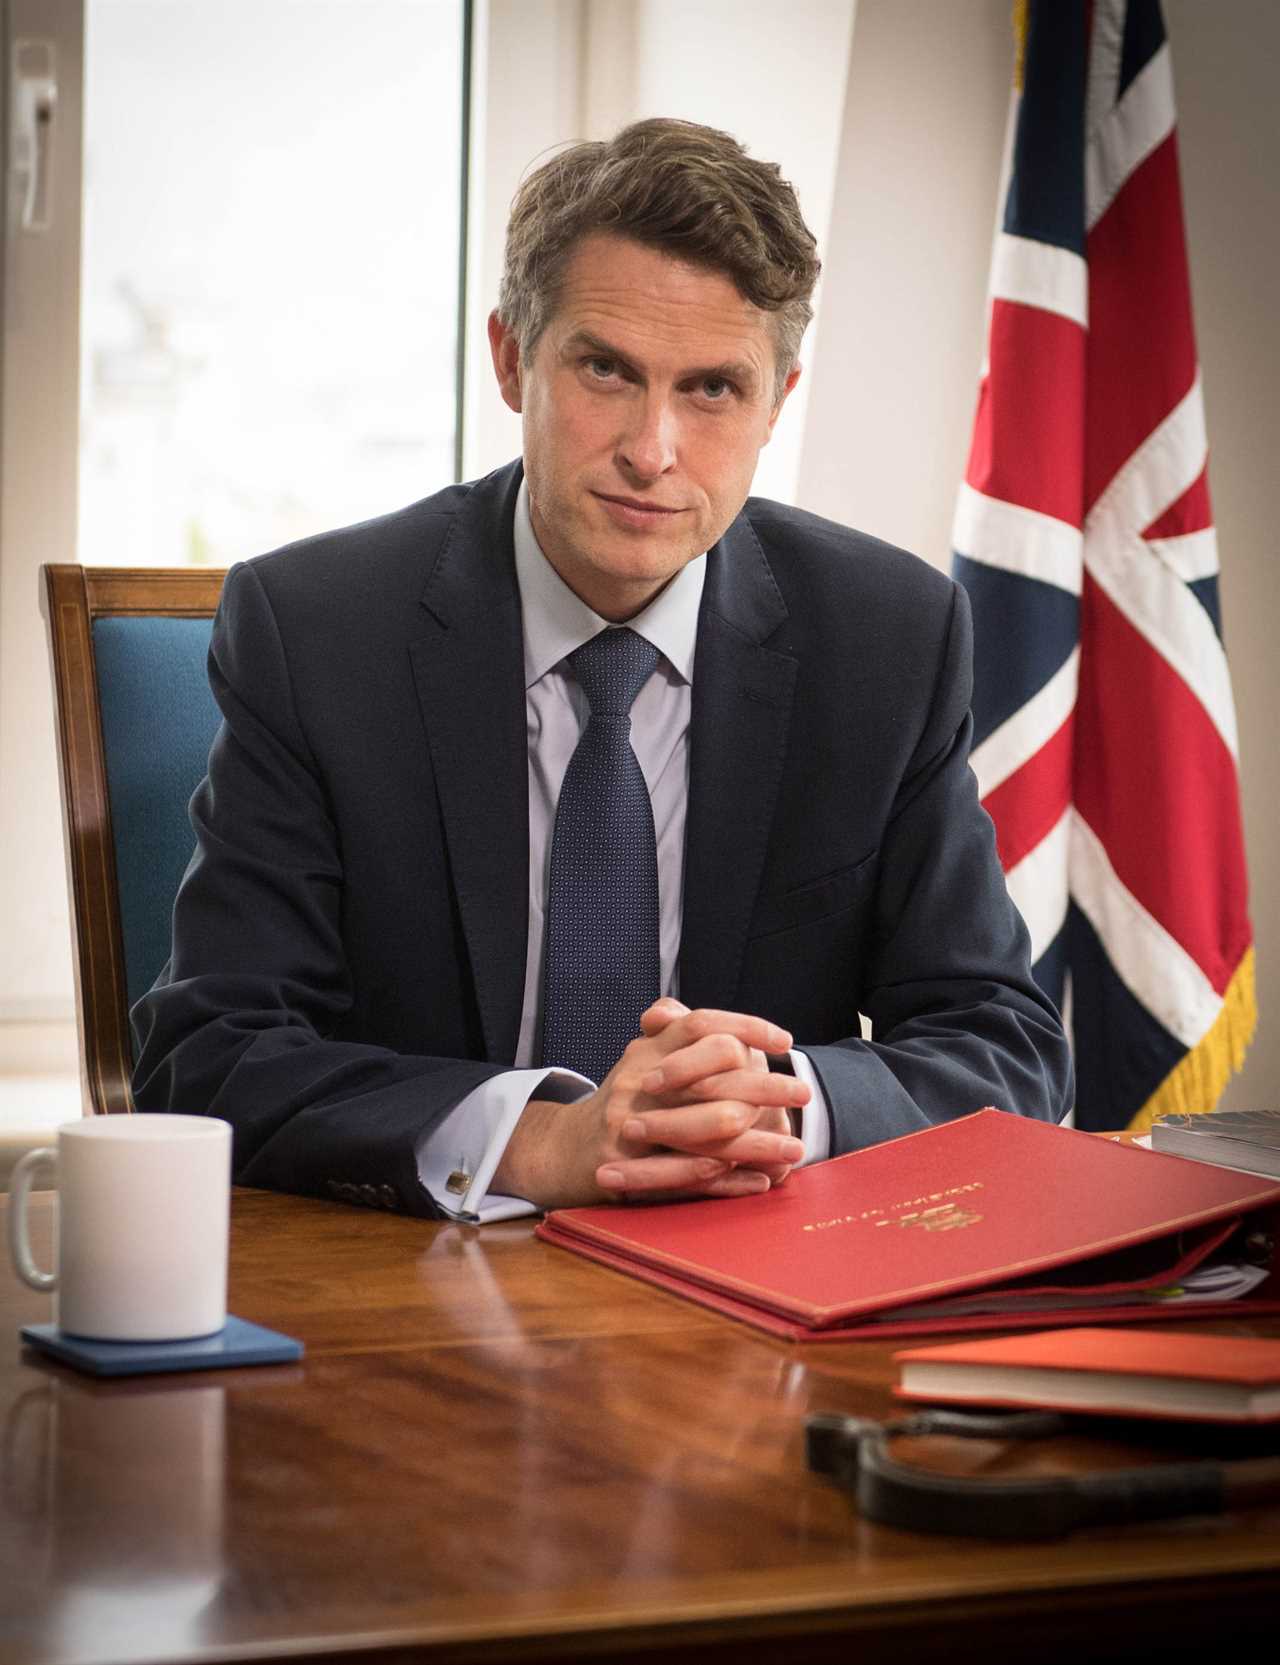 Gavin Williamson faces third Cabinet sacking after telling Liz Truss’ chief whip ‘you f*** us all over’